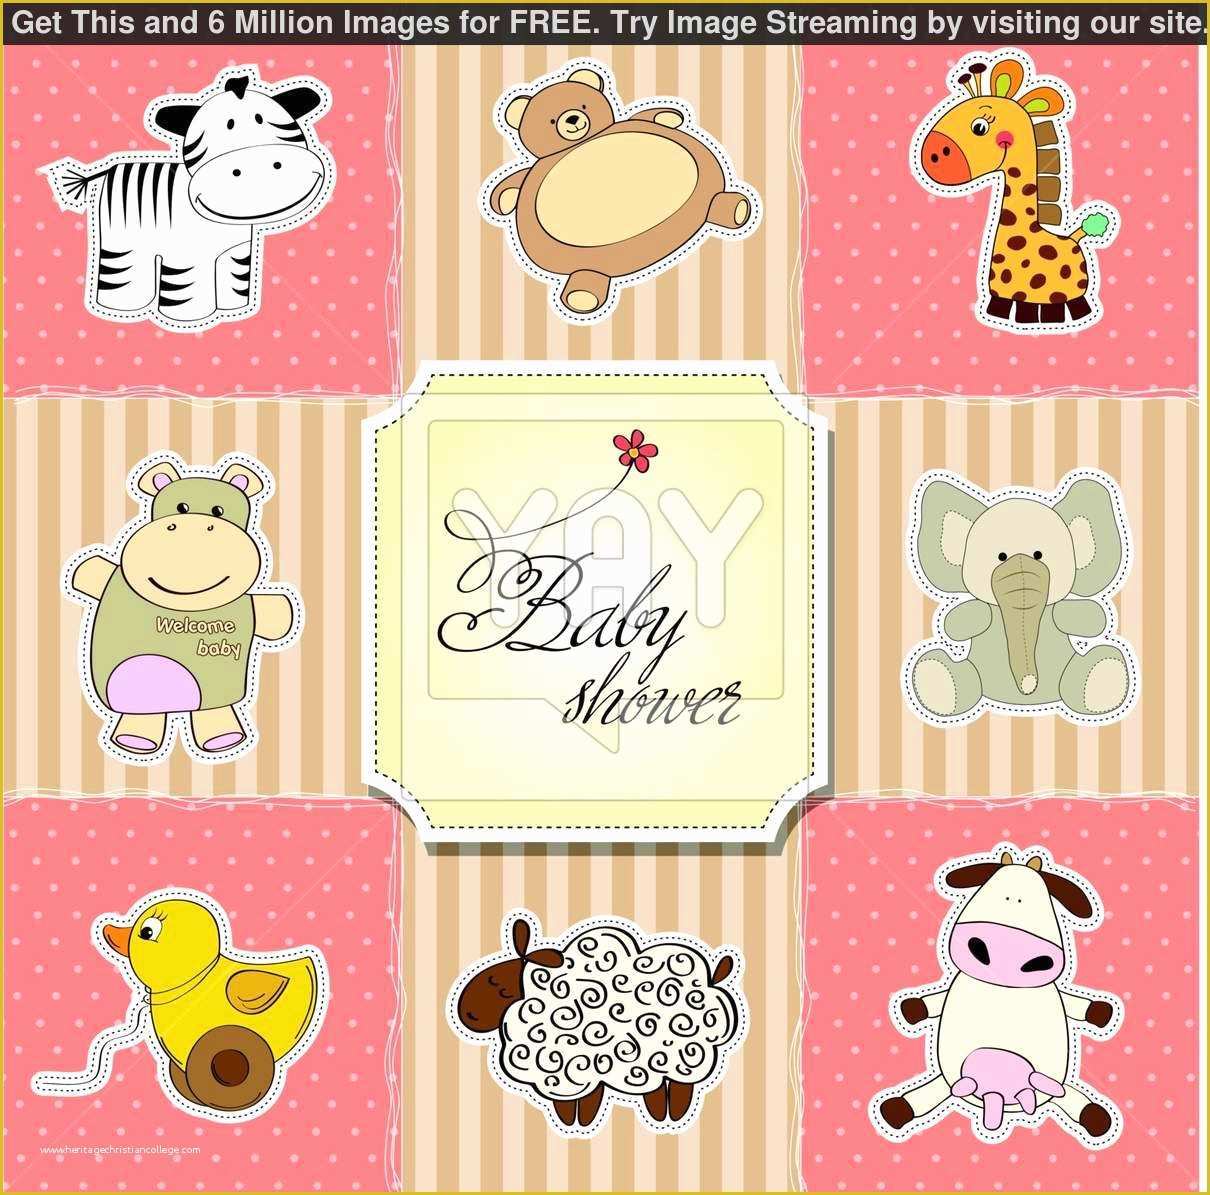 Baby Shower Card Template Free Of Baby Shower Template Word Mughals